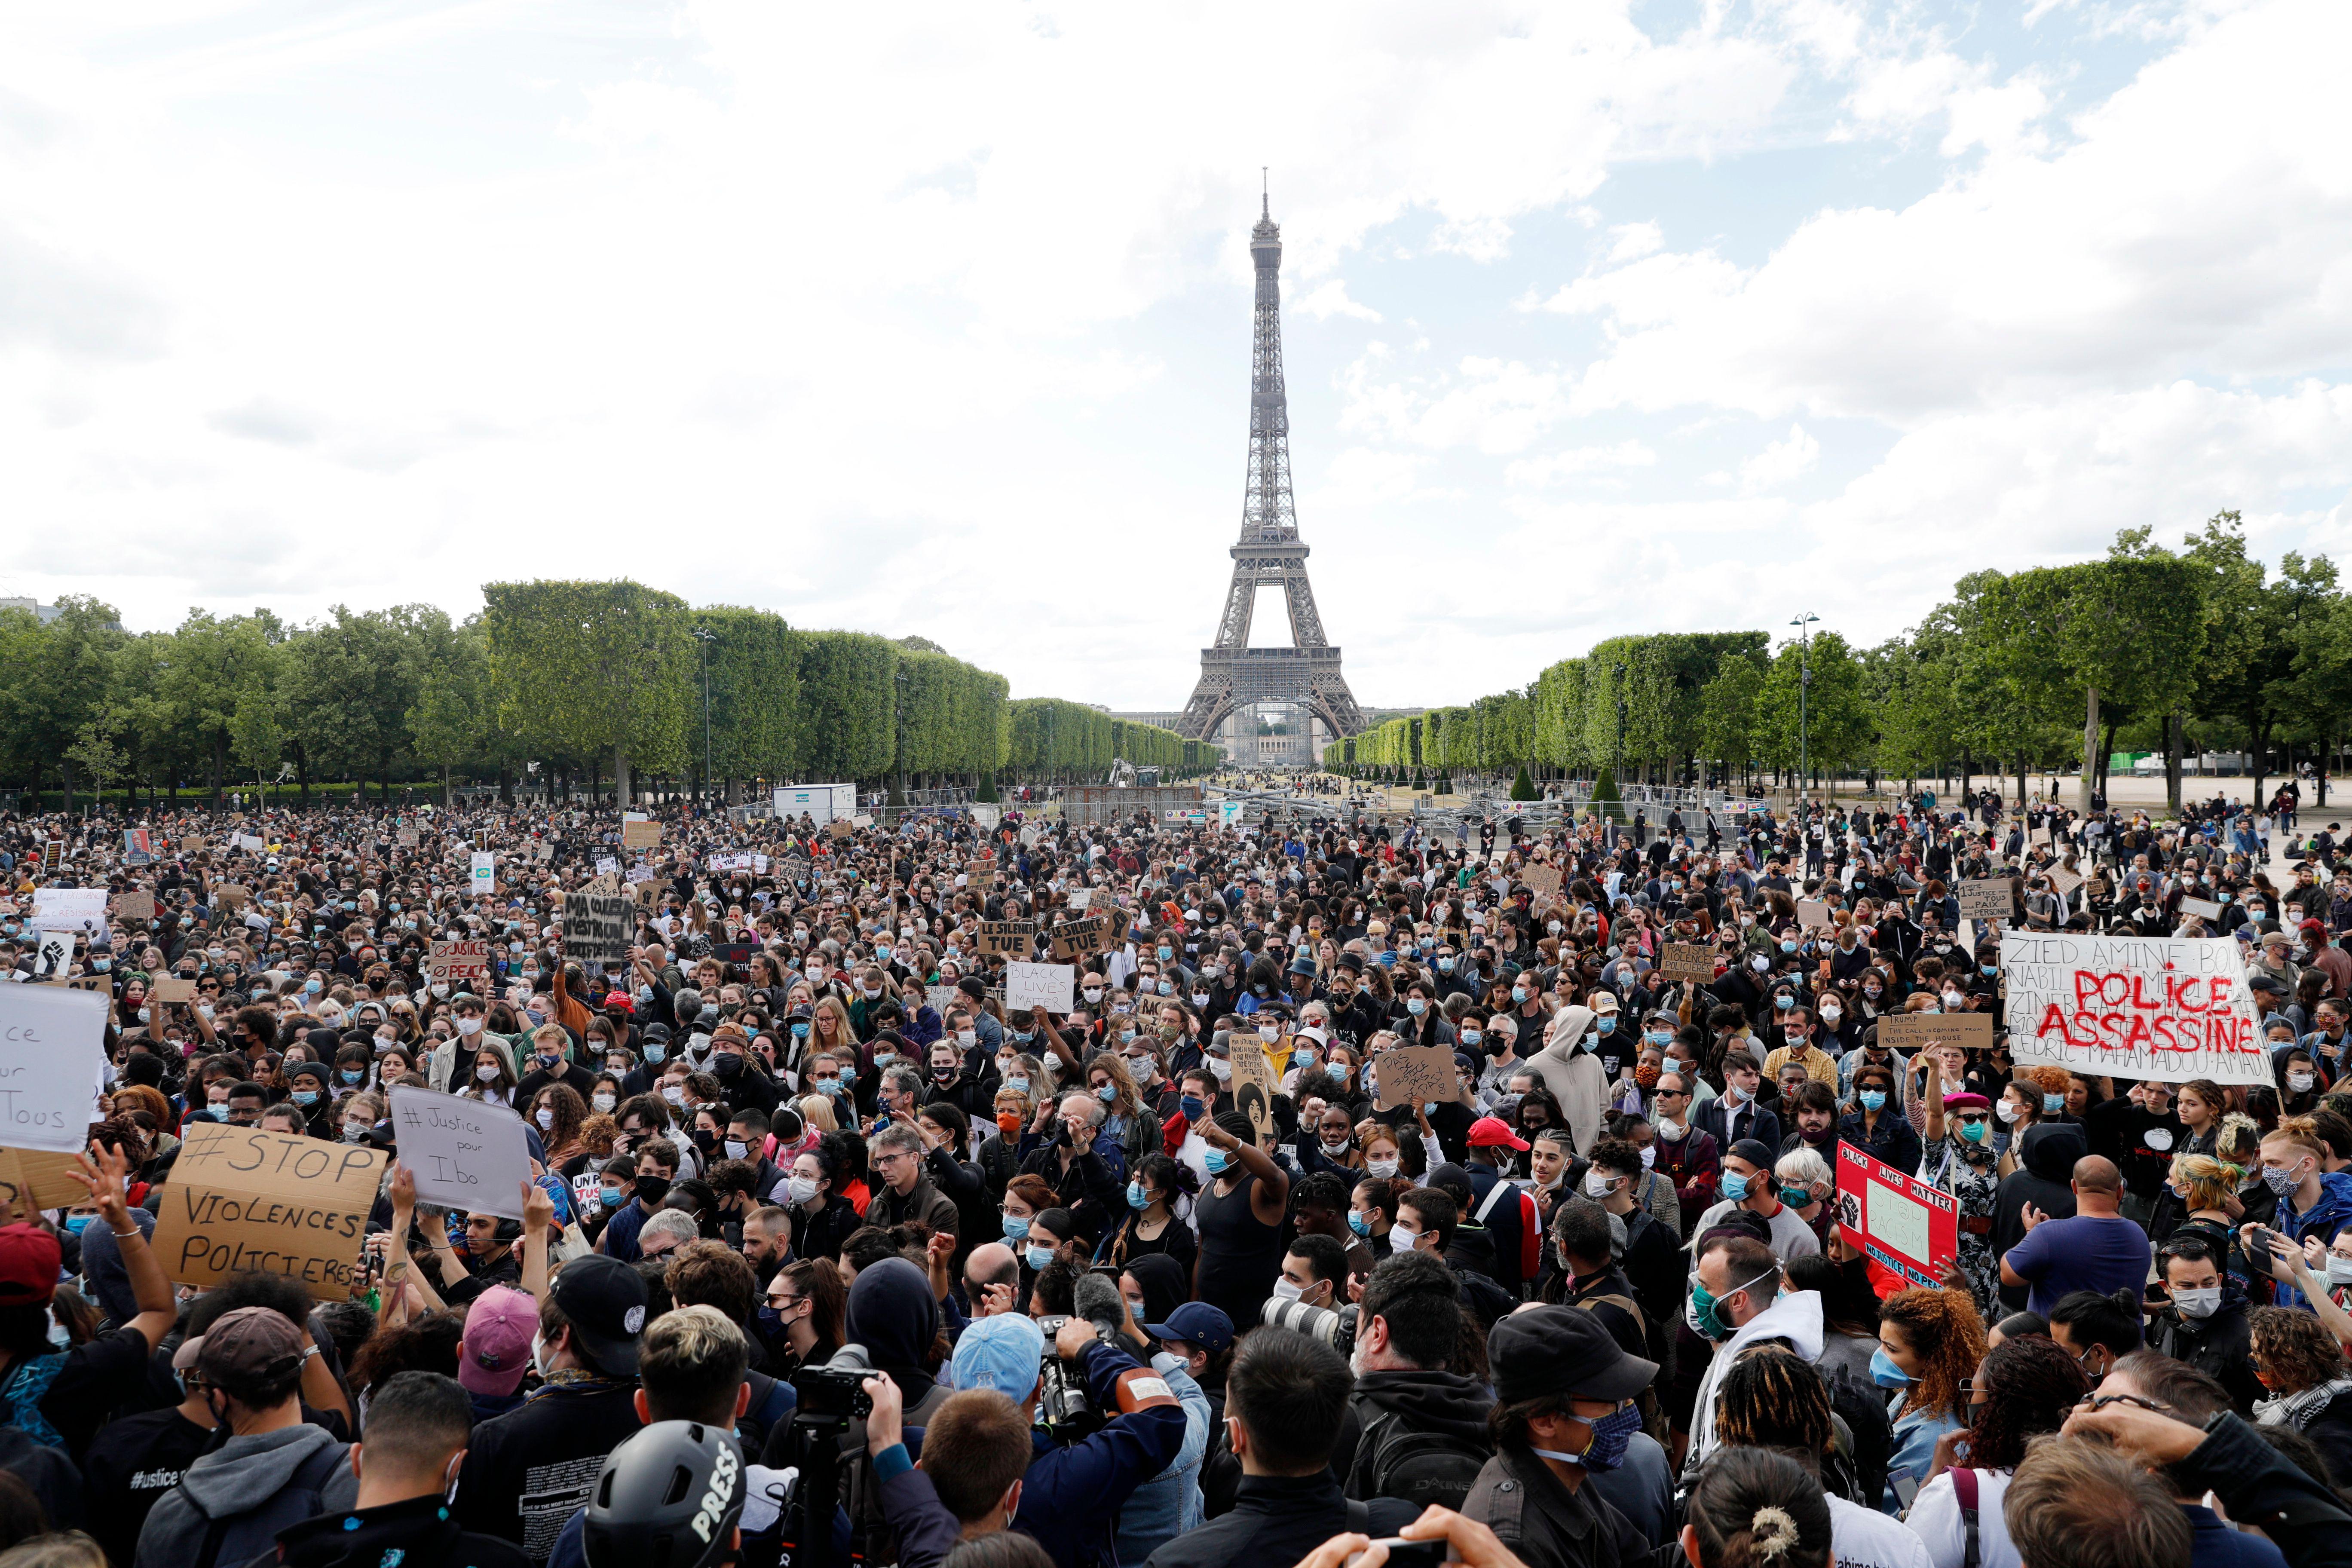 A huge crowd of protesters, with the Eiffel Tower in the background